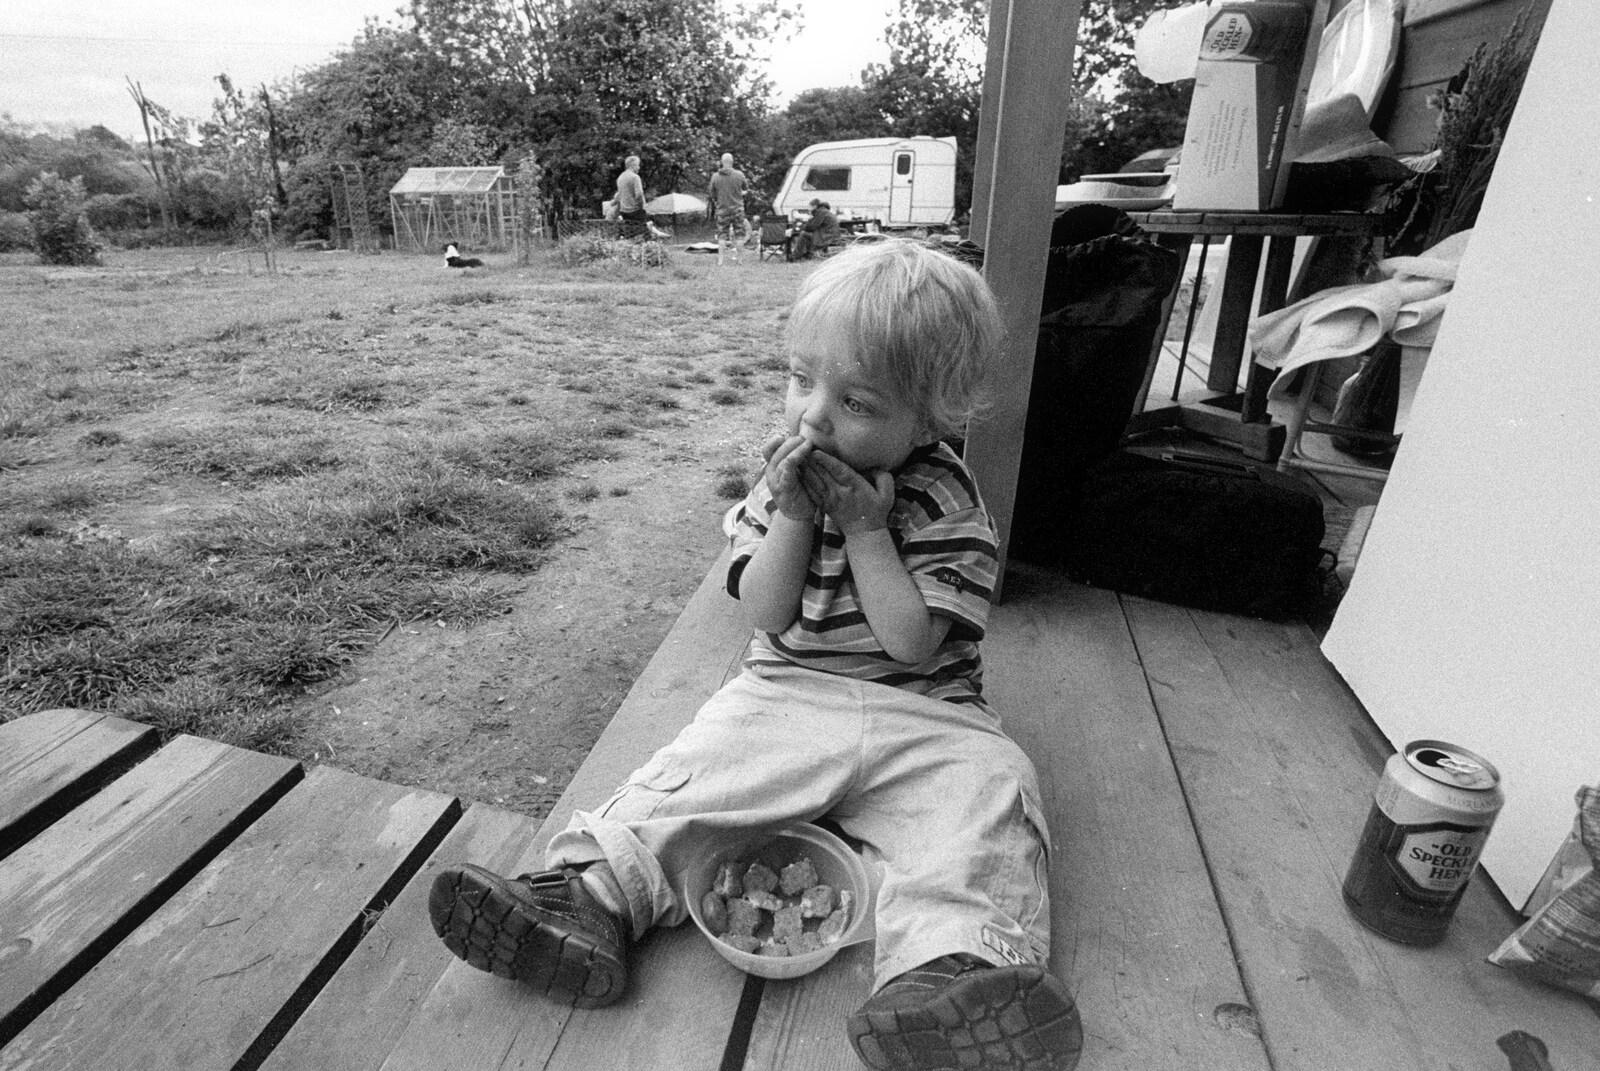 A Barbeque with Oak, Thrandeston, Suffolk - 30th May 2010: Fred stuffs food in to his face